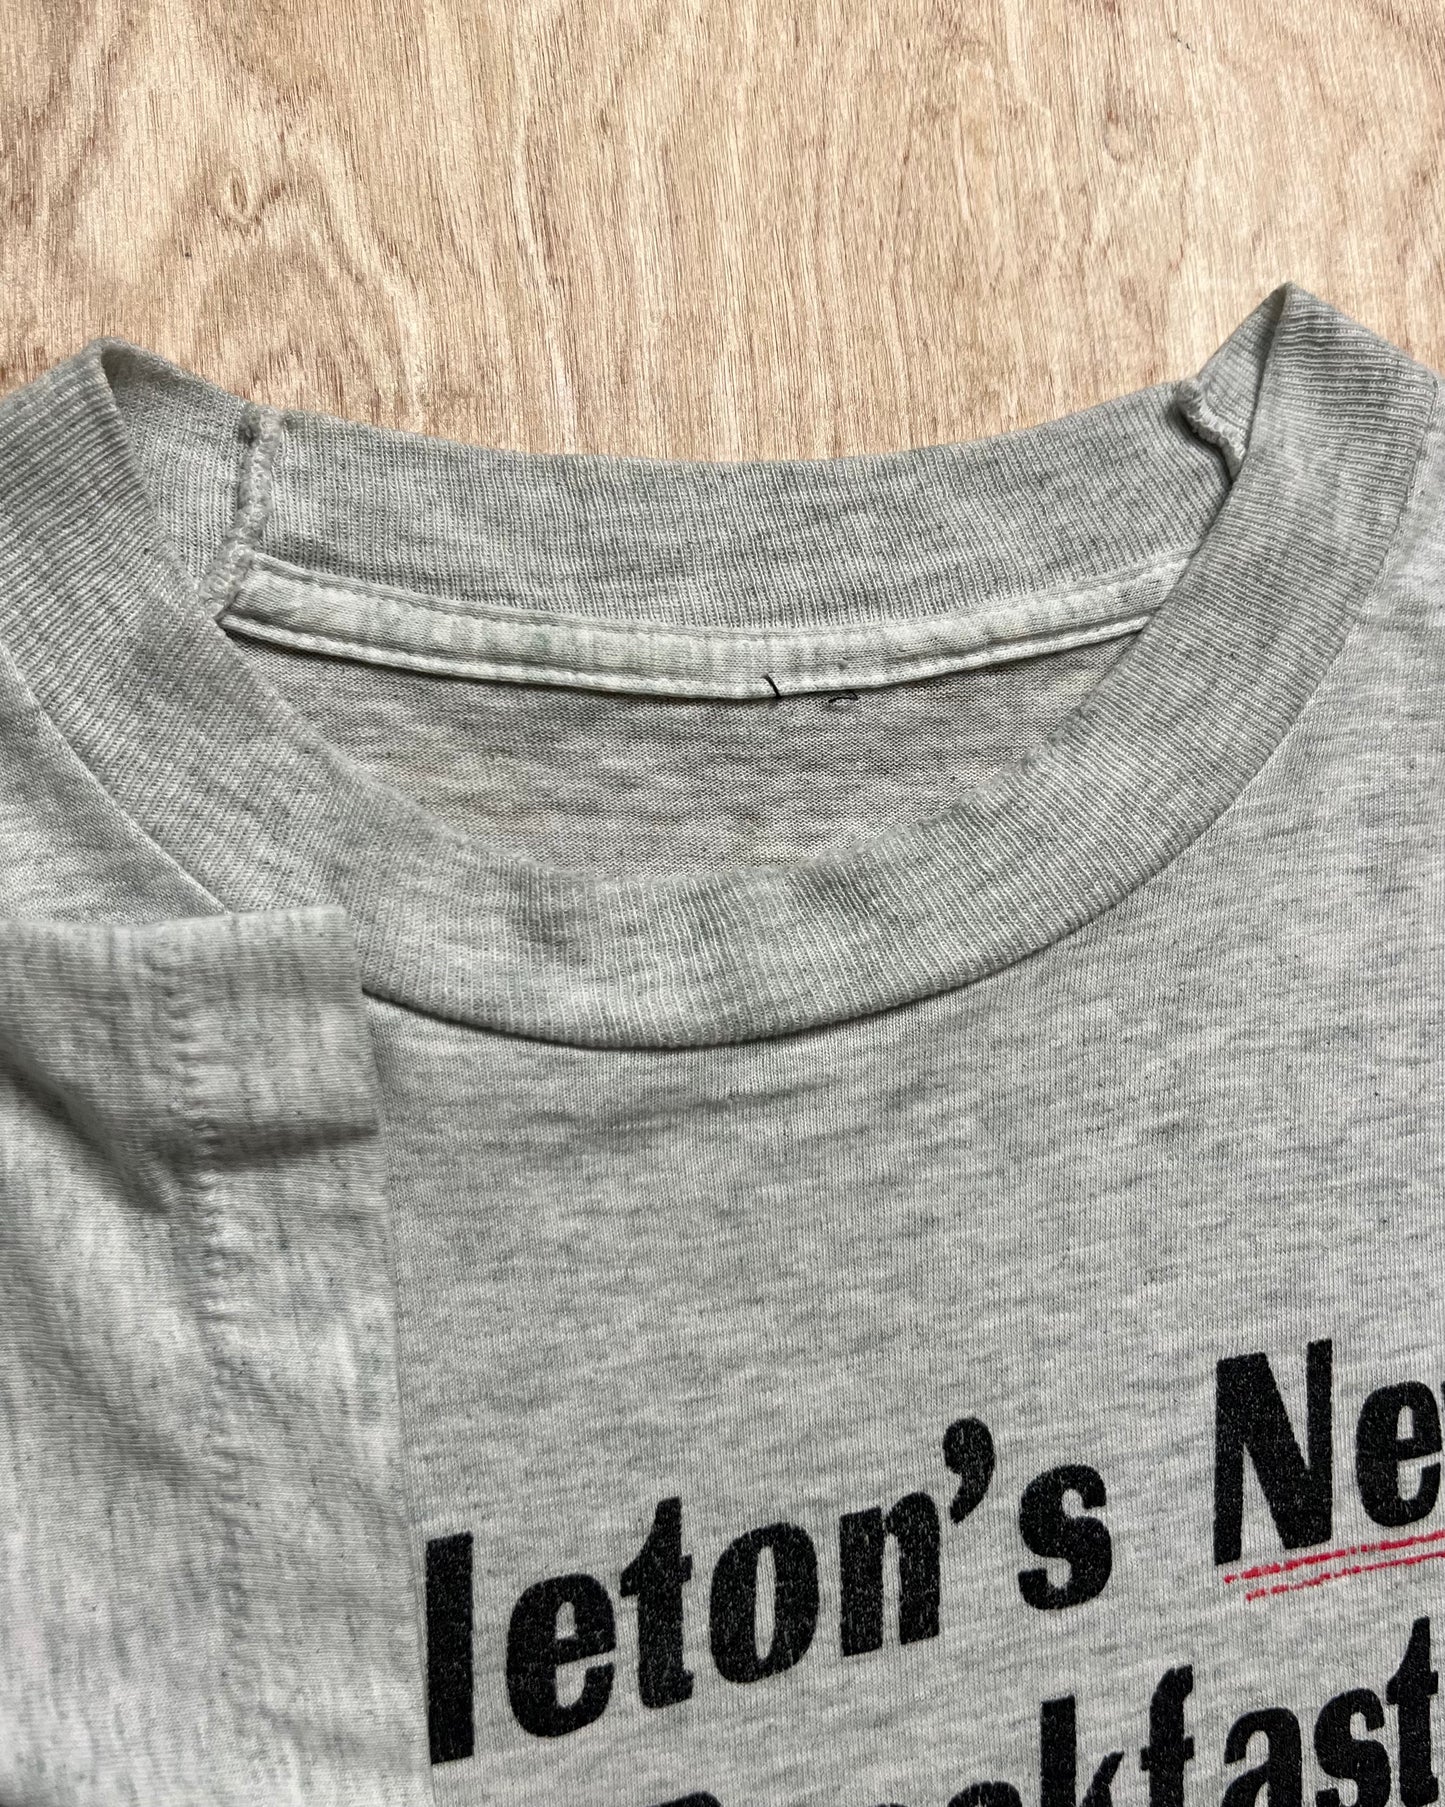 Early 1990's Appleton's Penitentiary Comedy Single Stitch T-Shirt